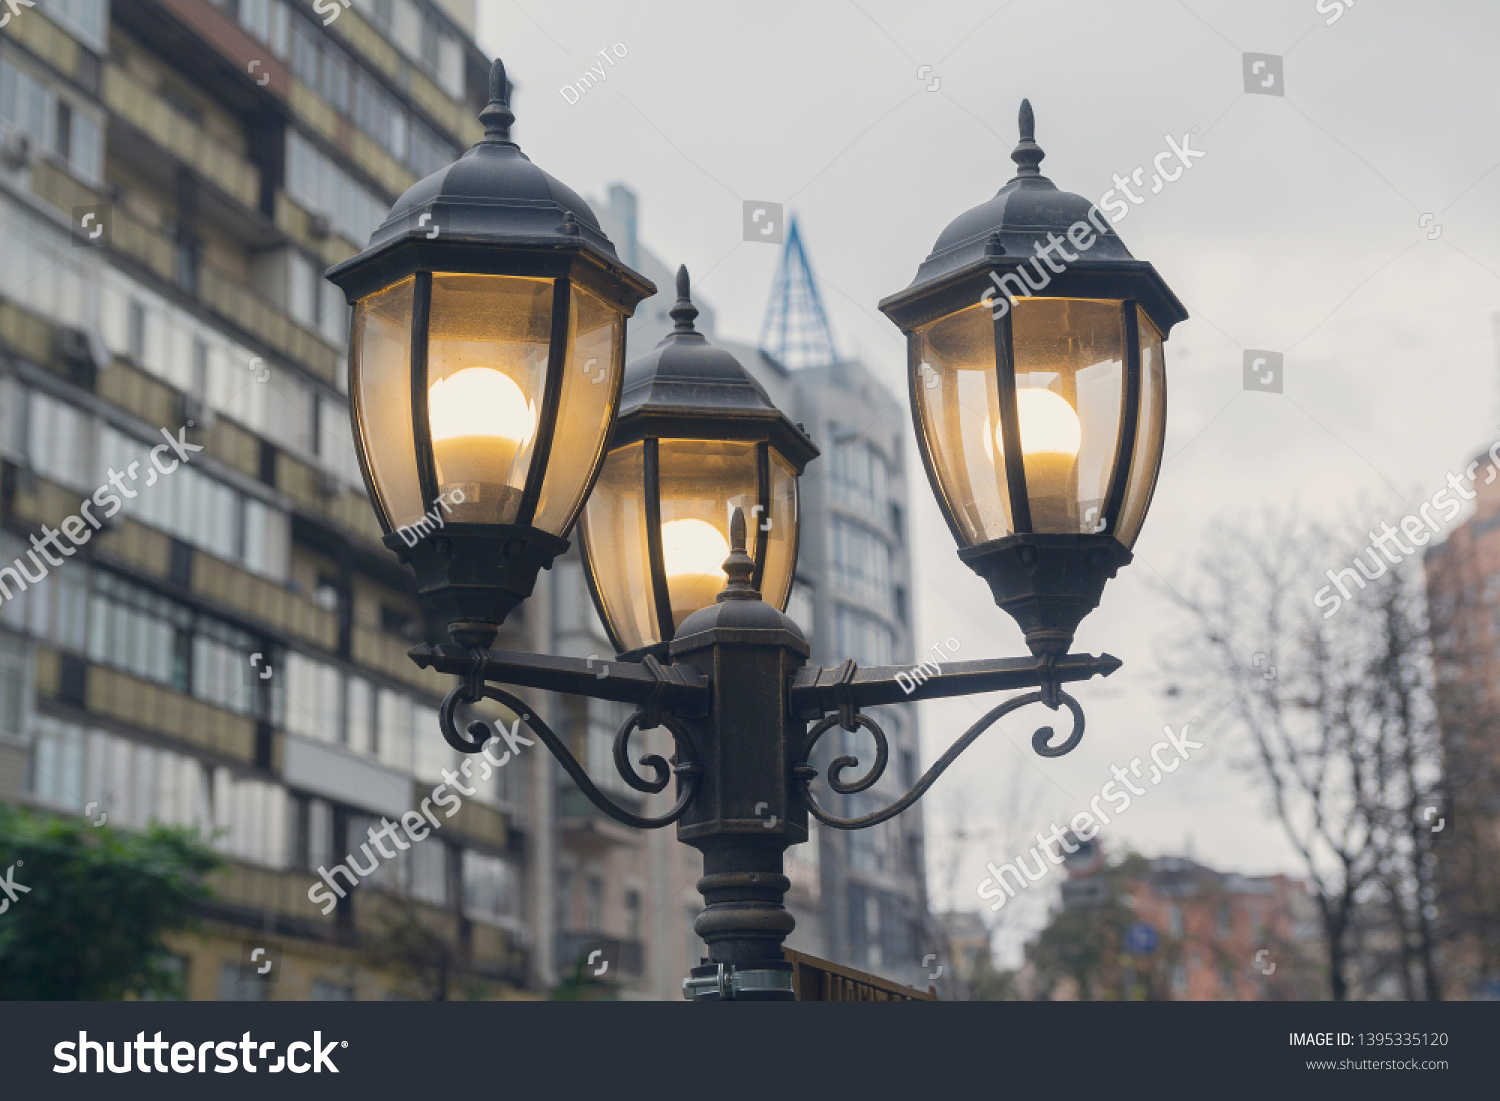 Electric light pole lantern on a city street with two bulb lamps and forged metal retro style #1395335120